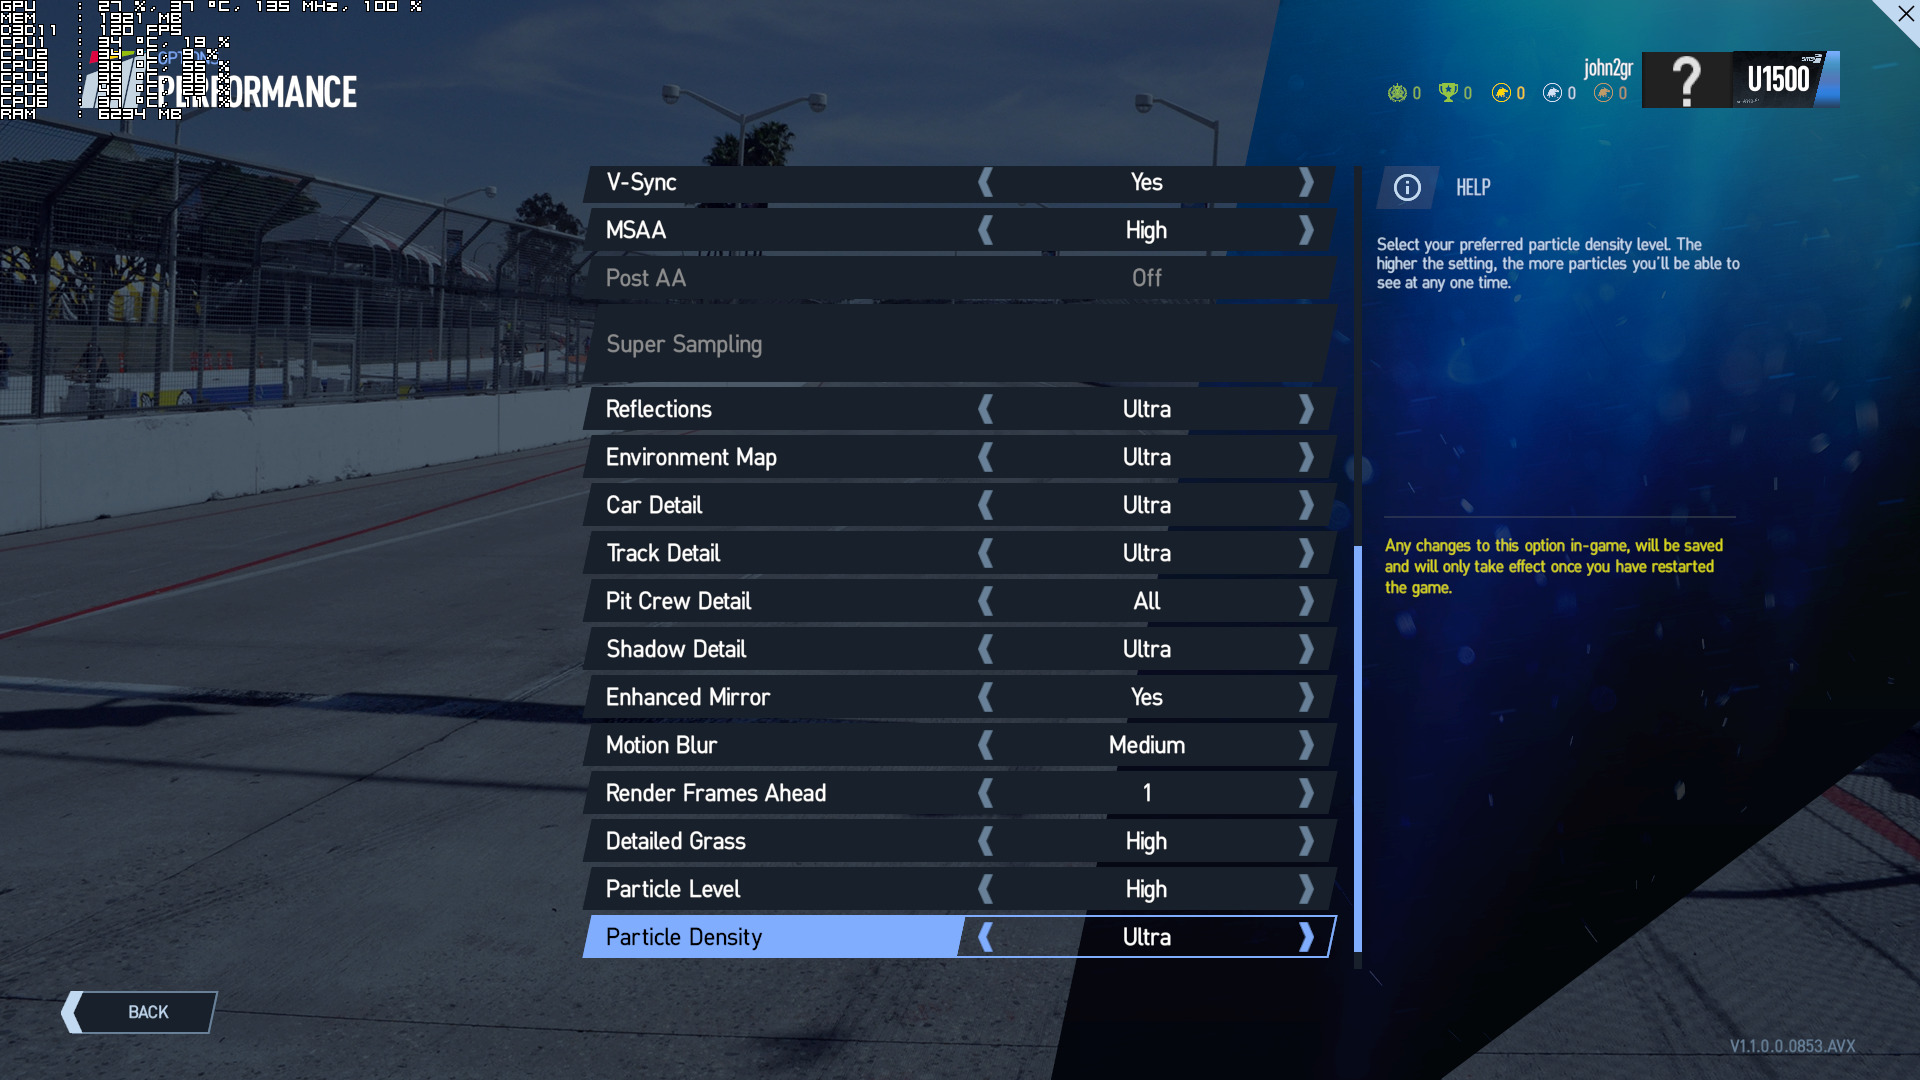 Project CARS Final PC Version Graphical Options Revealed